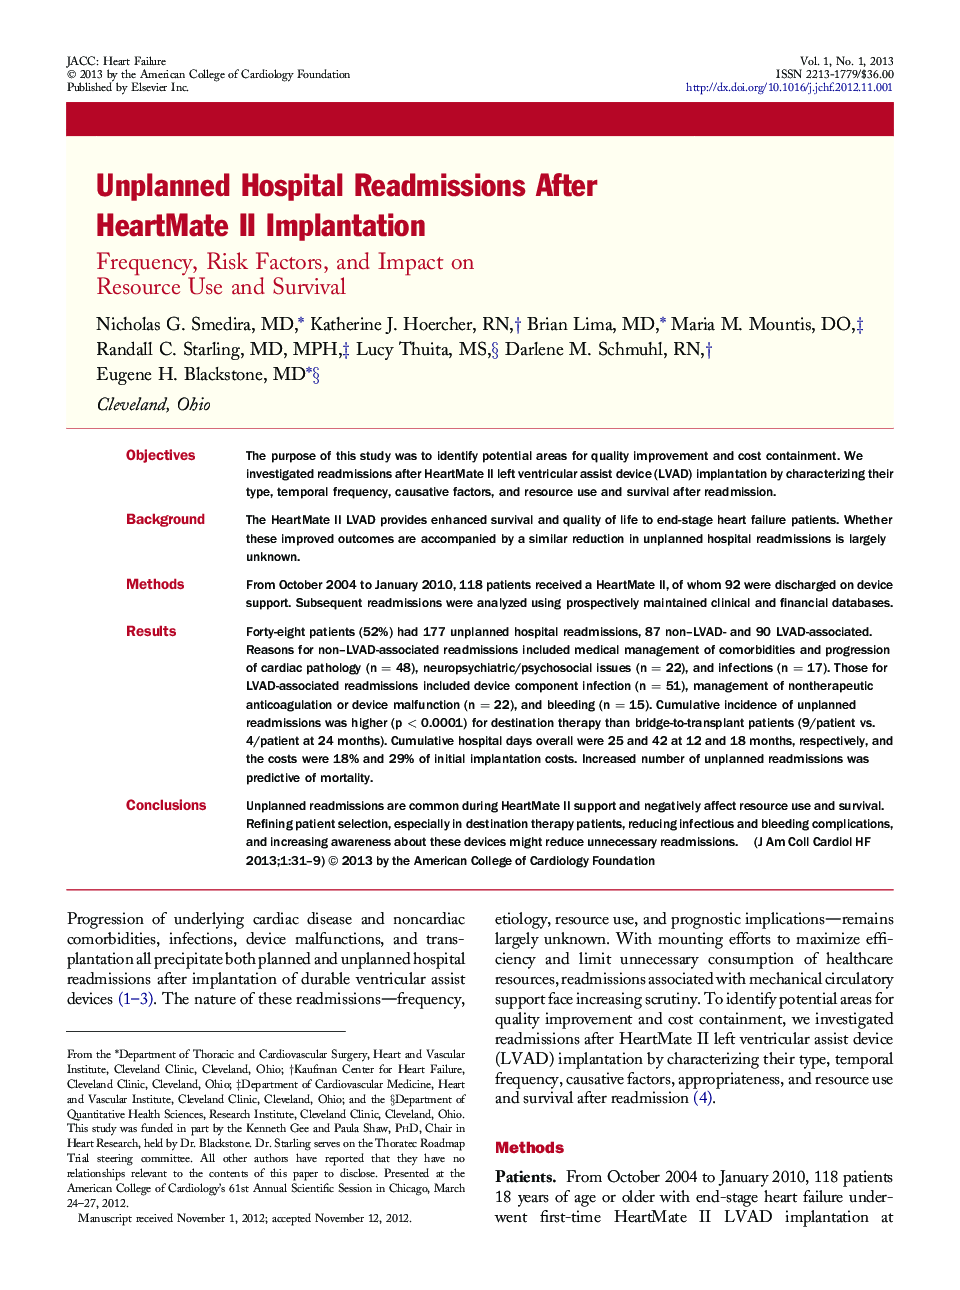 Unplanned Hospital Readmissions After HeartMate II Implantation : Frequency, Risk Factors, and Impact on Resource Use and Survival